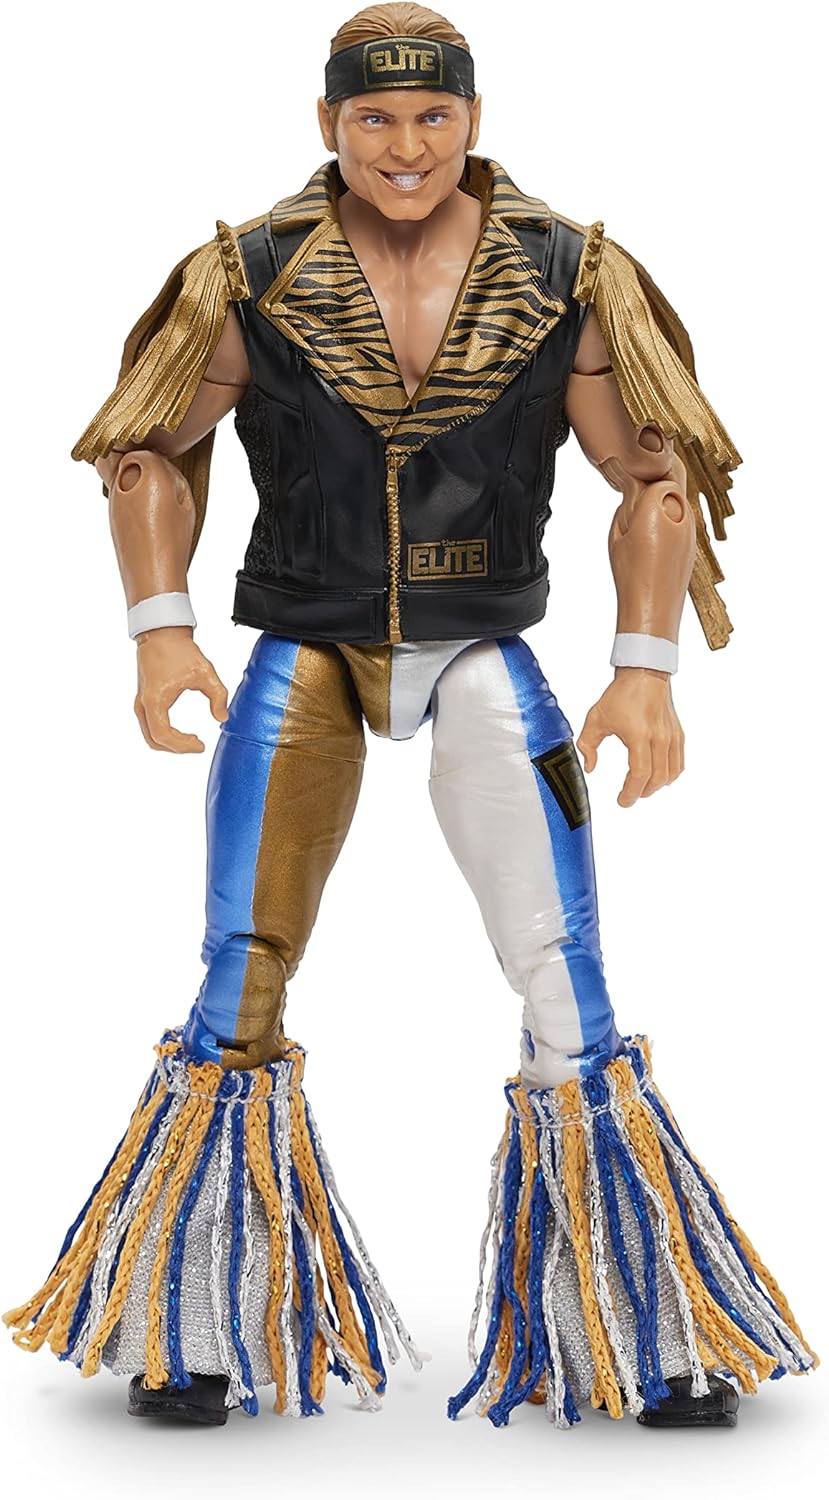 AEW Unrivaled Collection Series 3 - #24 Nick Jackson